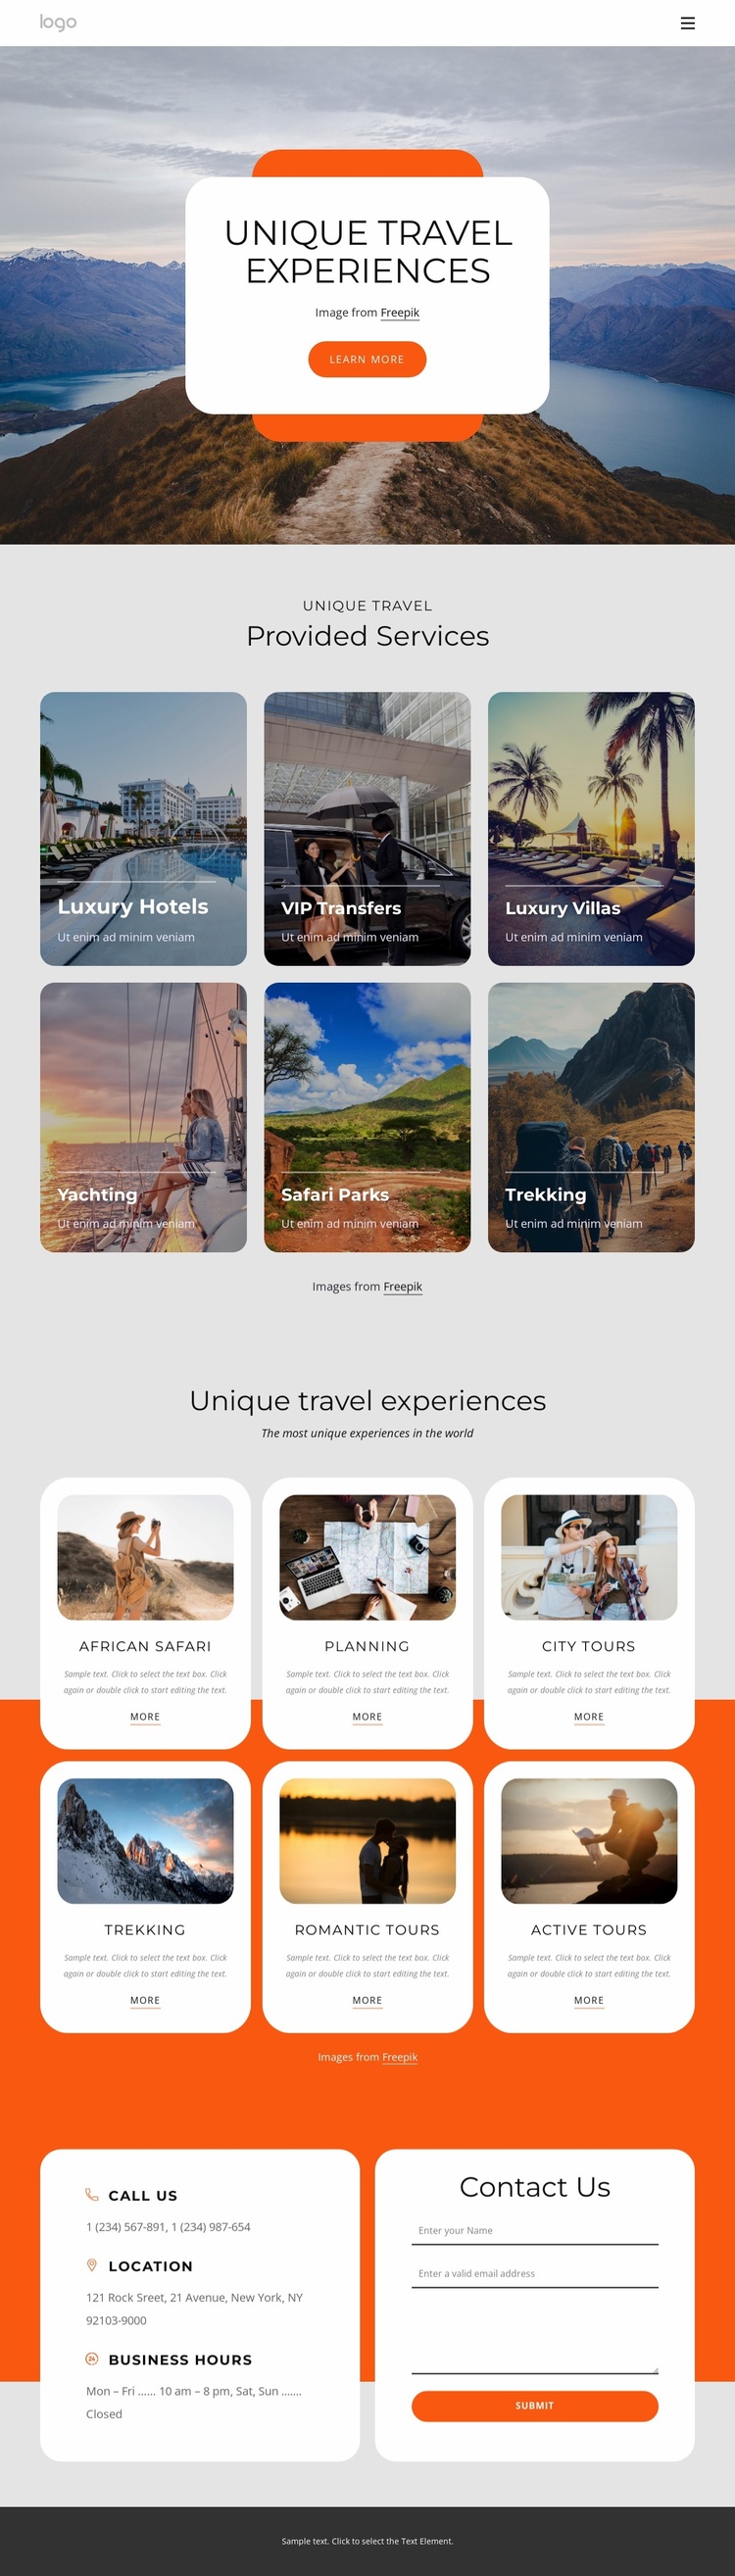 Luxury small-group travel experience Ecommerce Website Design